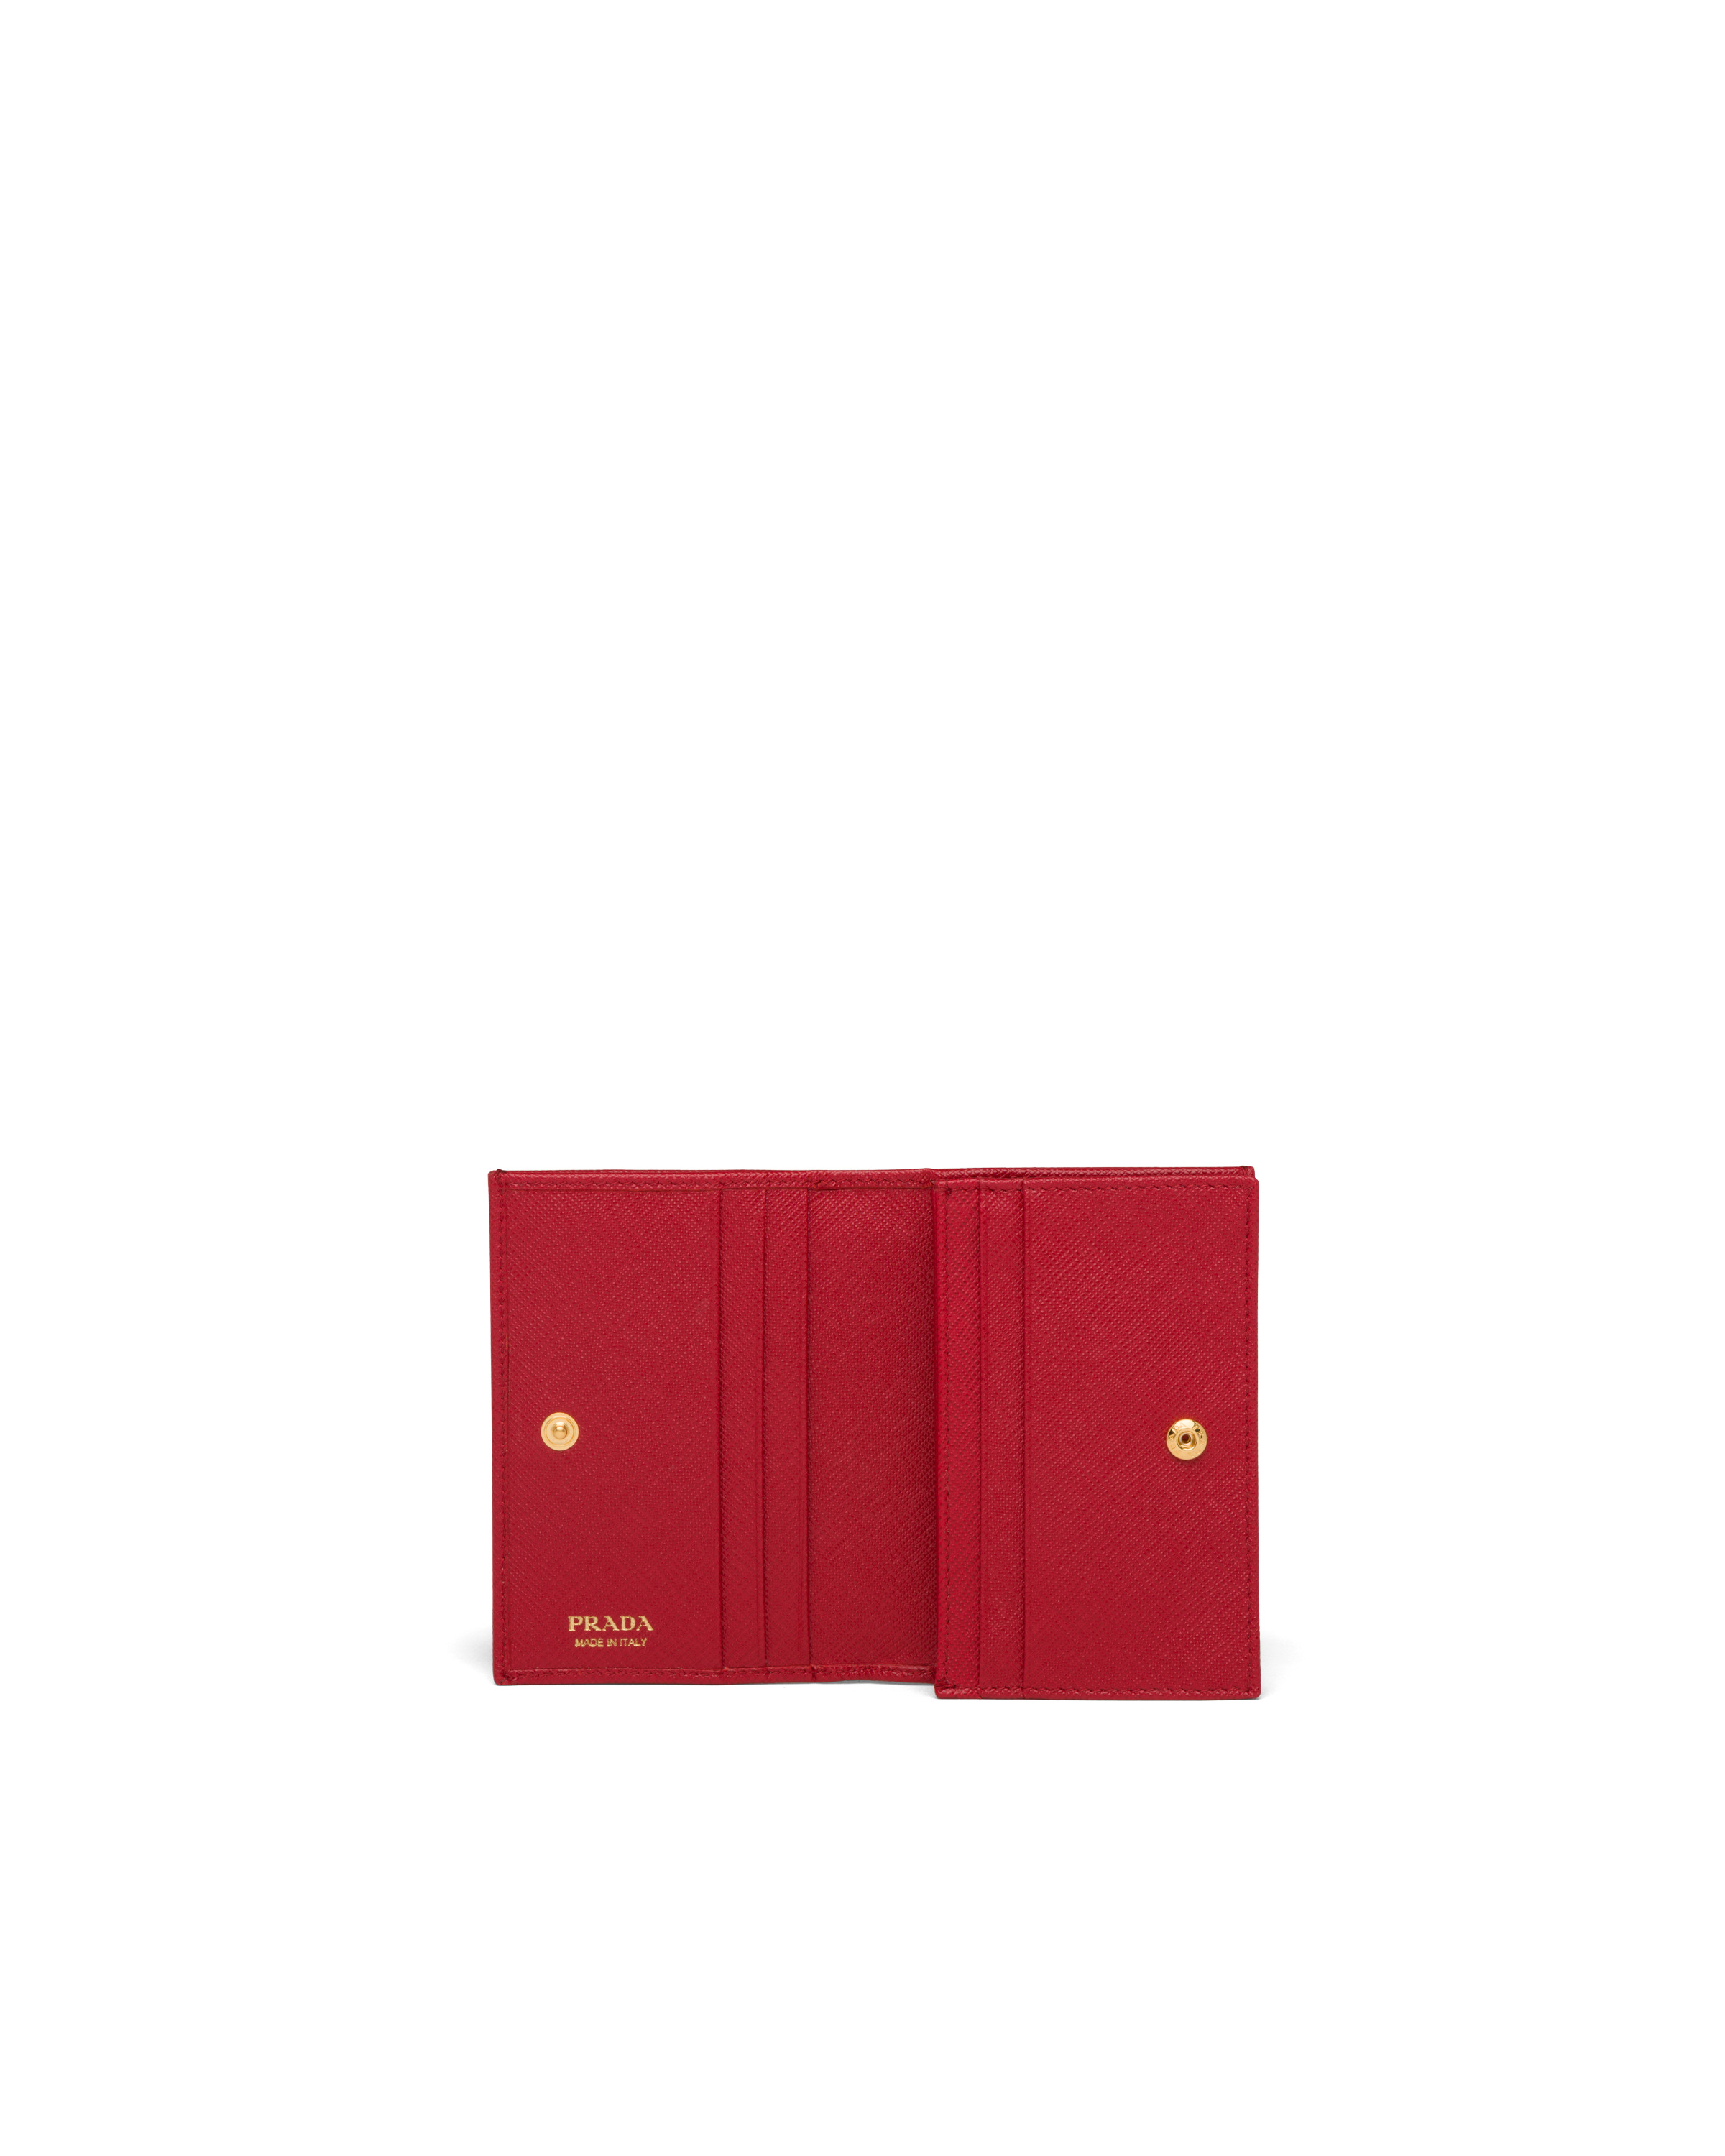 Small Saffiano Leather Wallet - 4